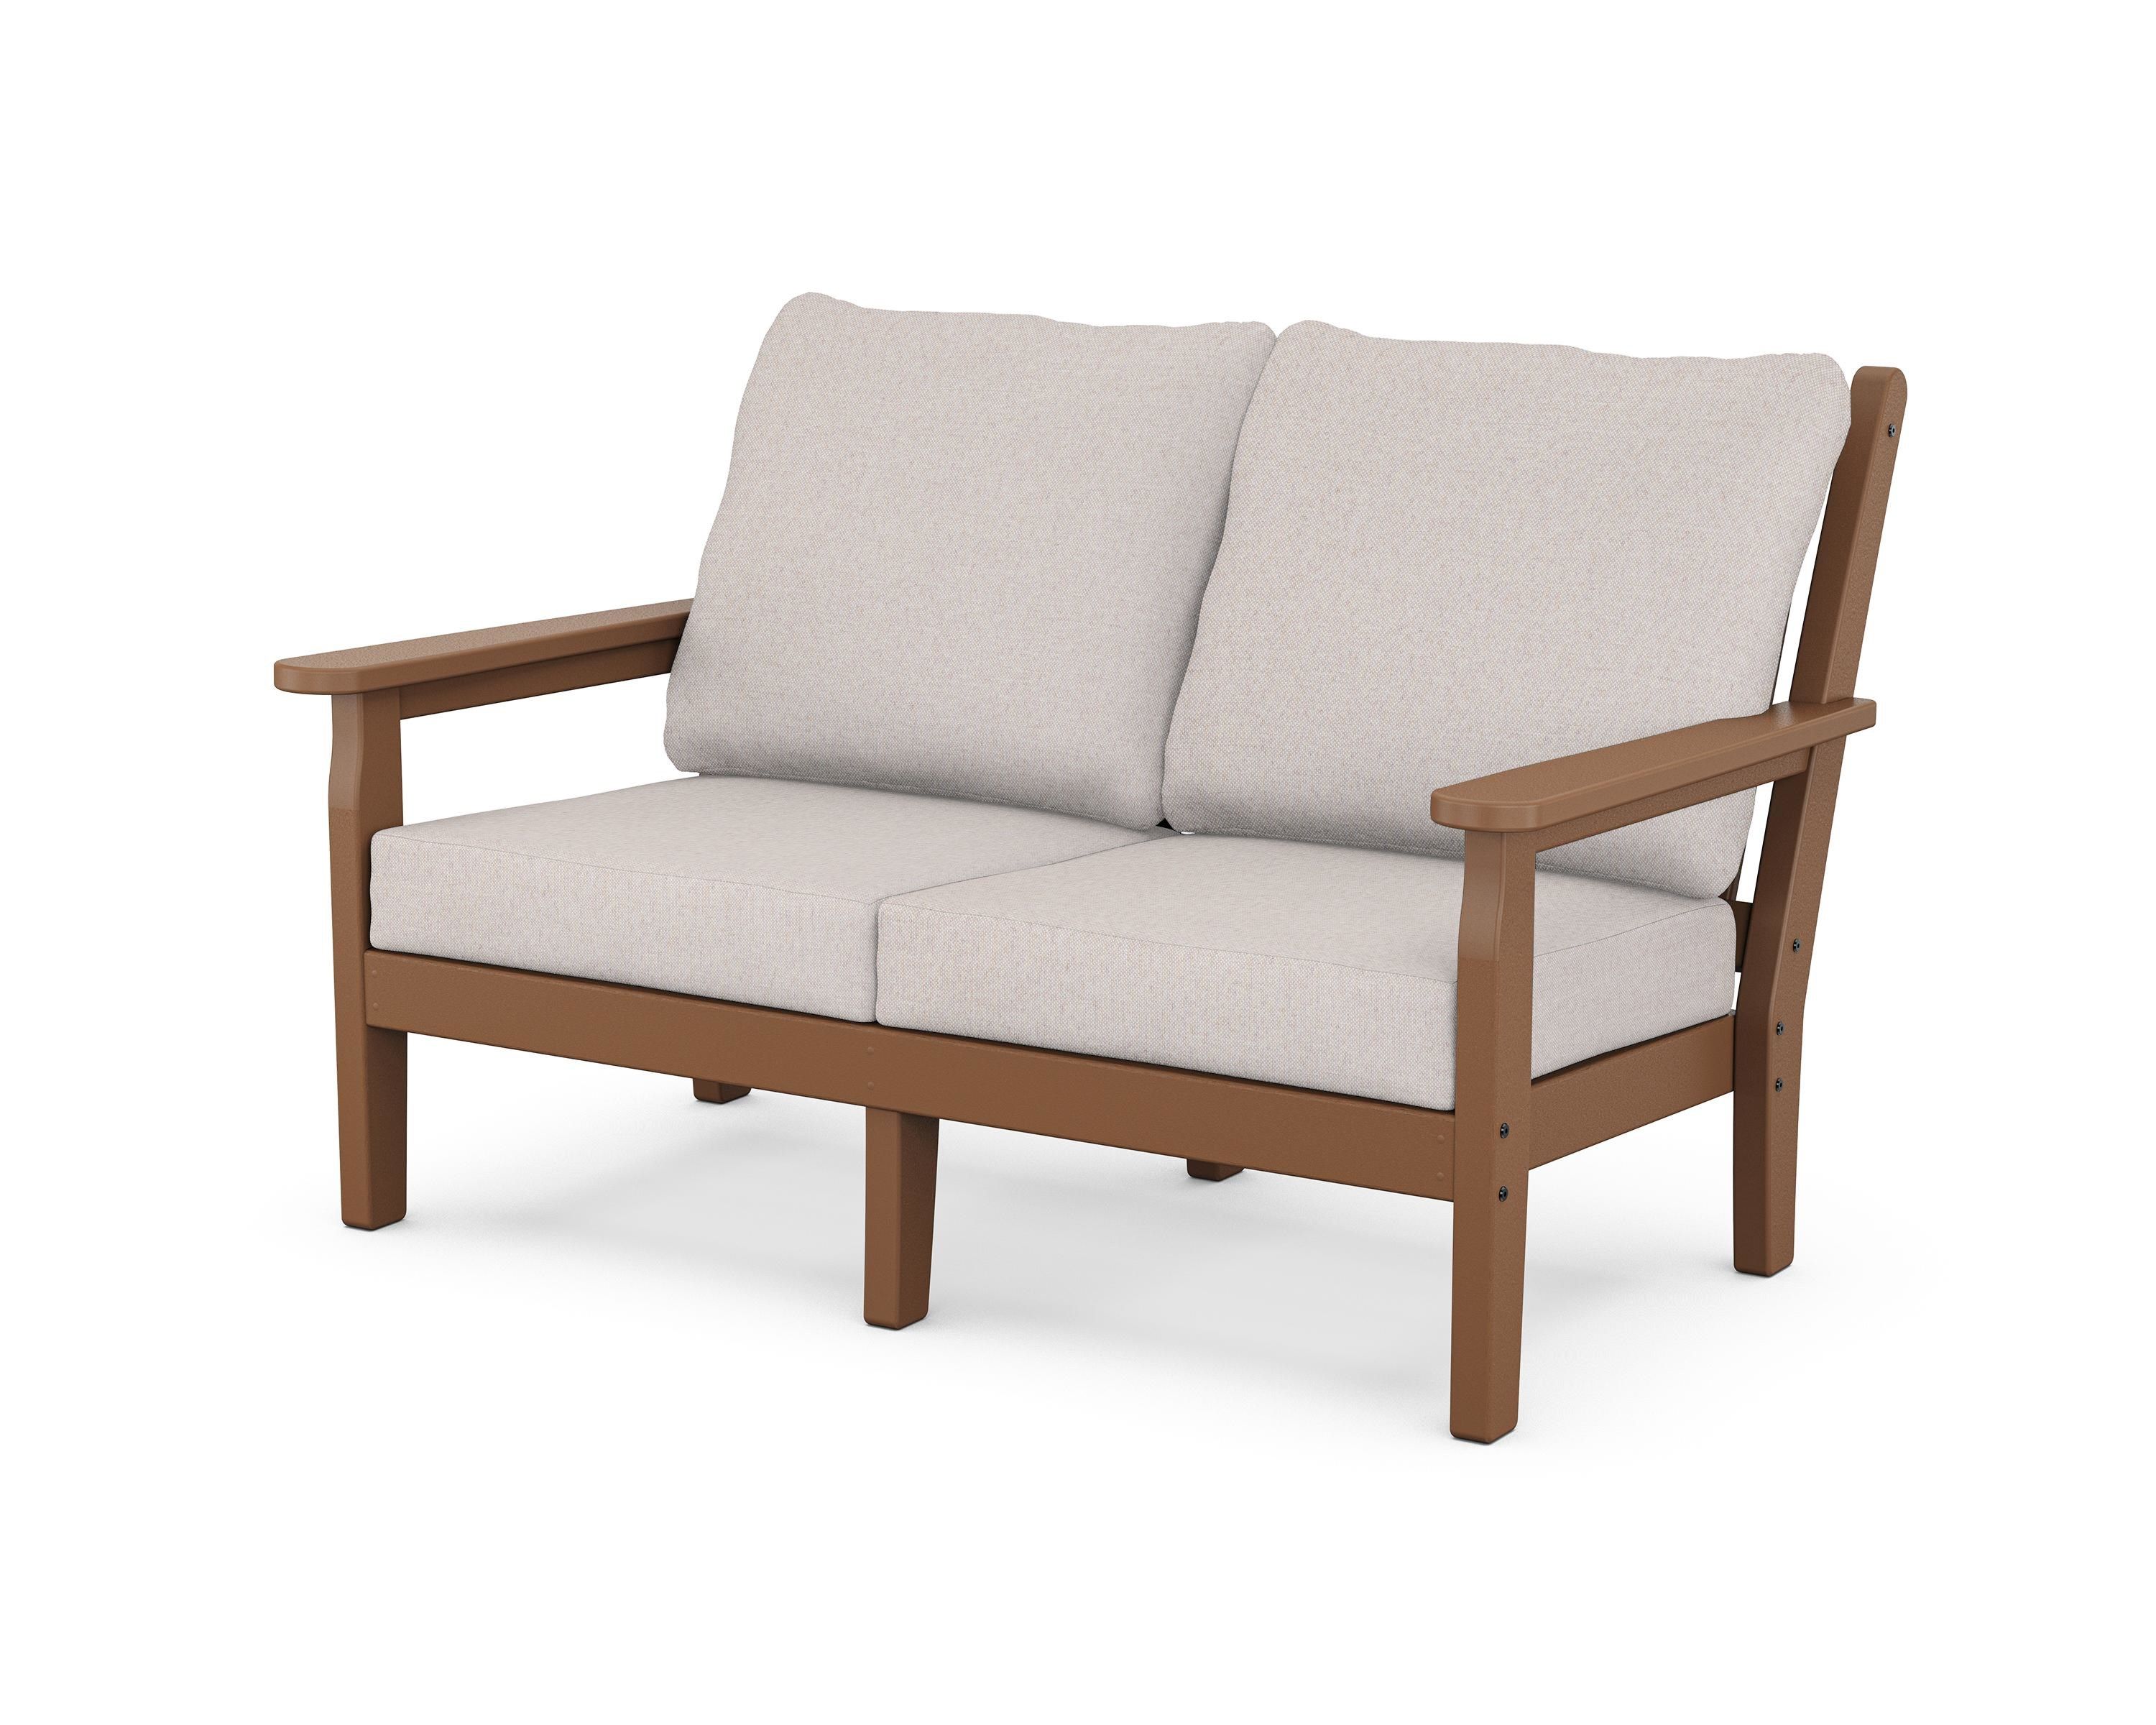 POLYWOOD Chippendale Deep Seating Loveseat